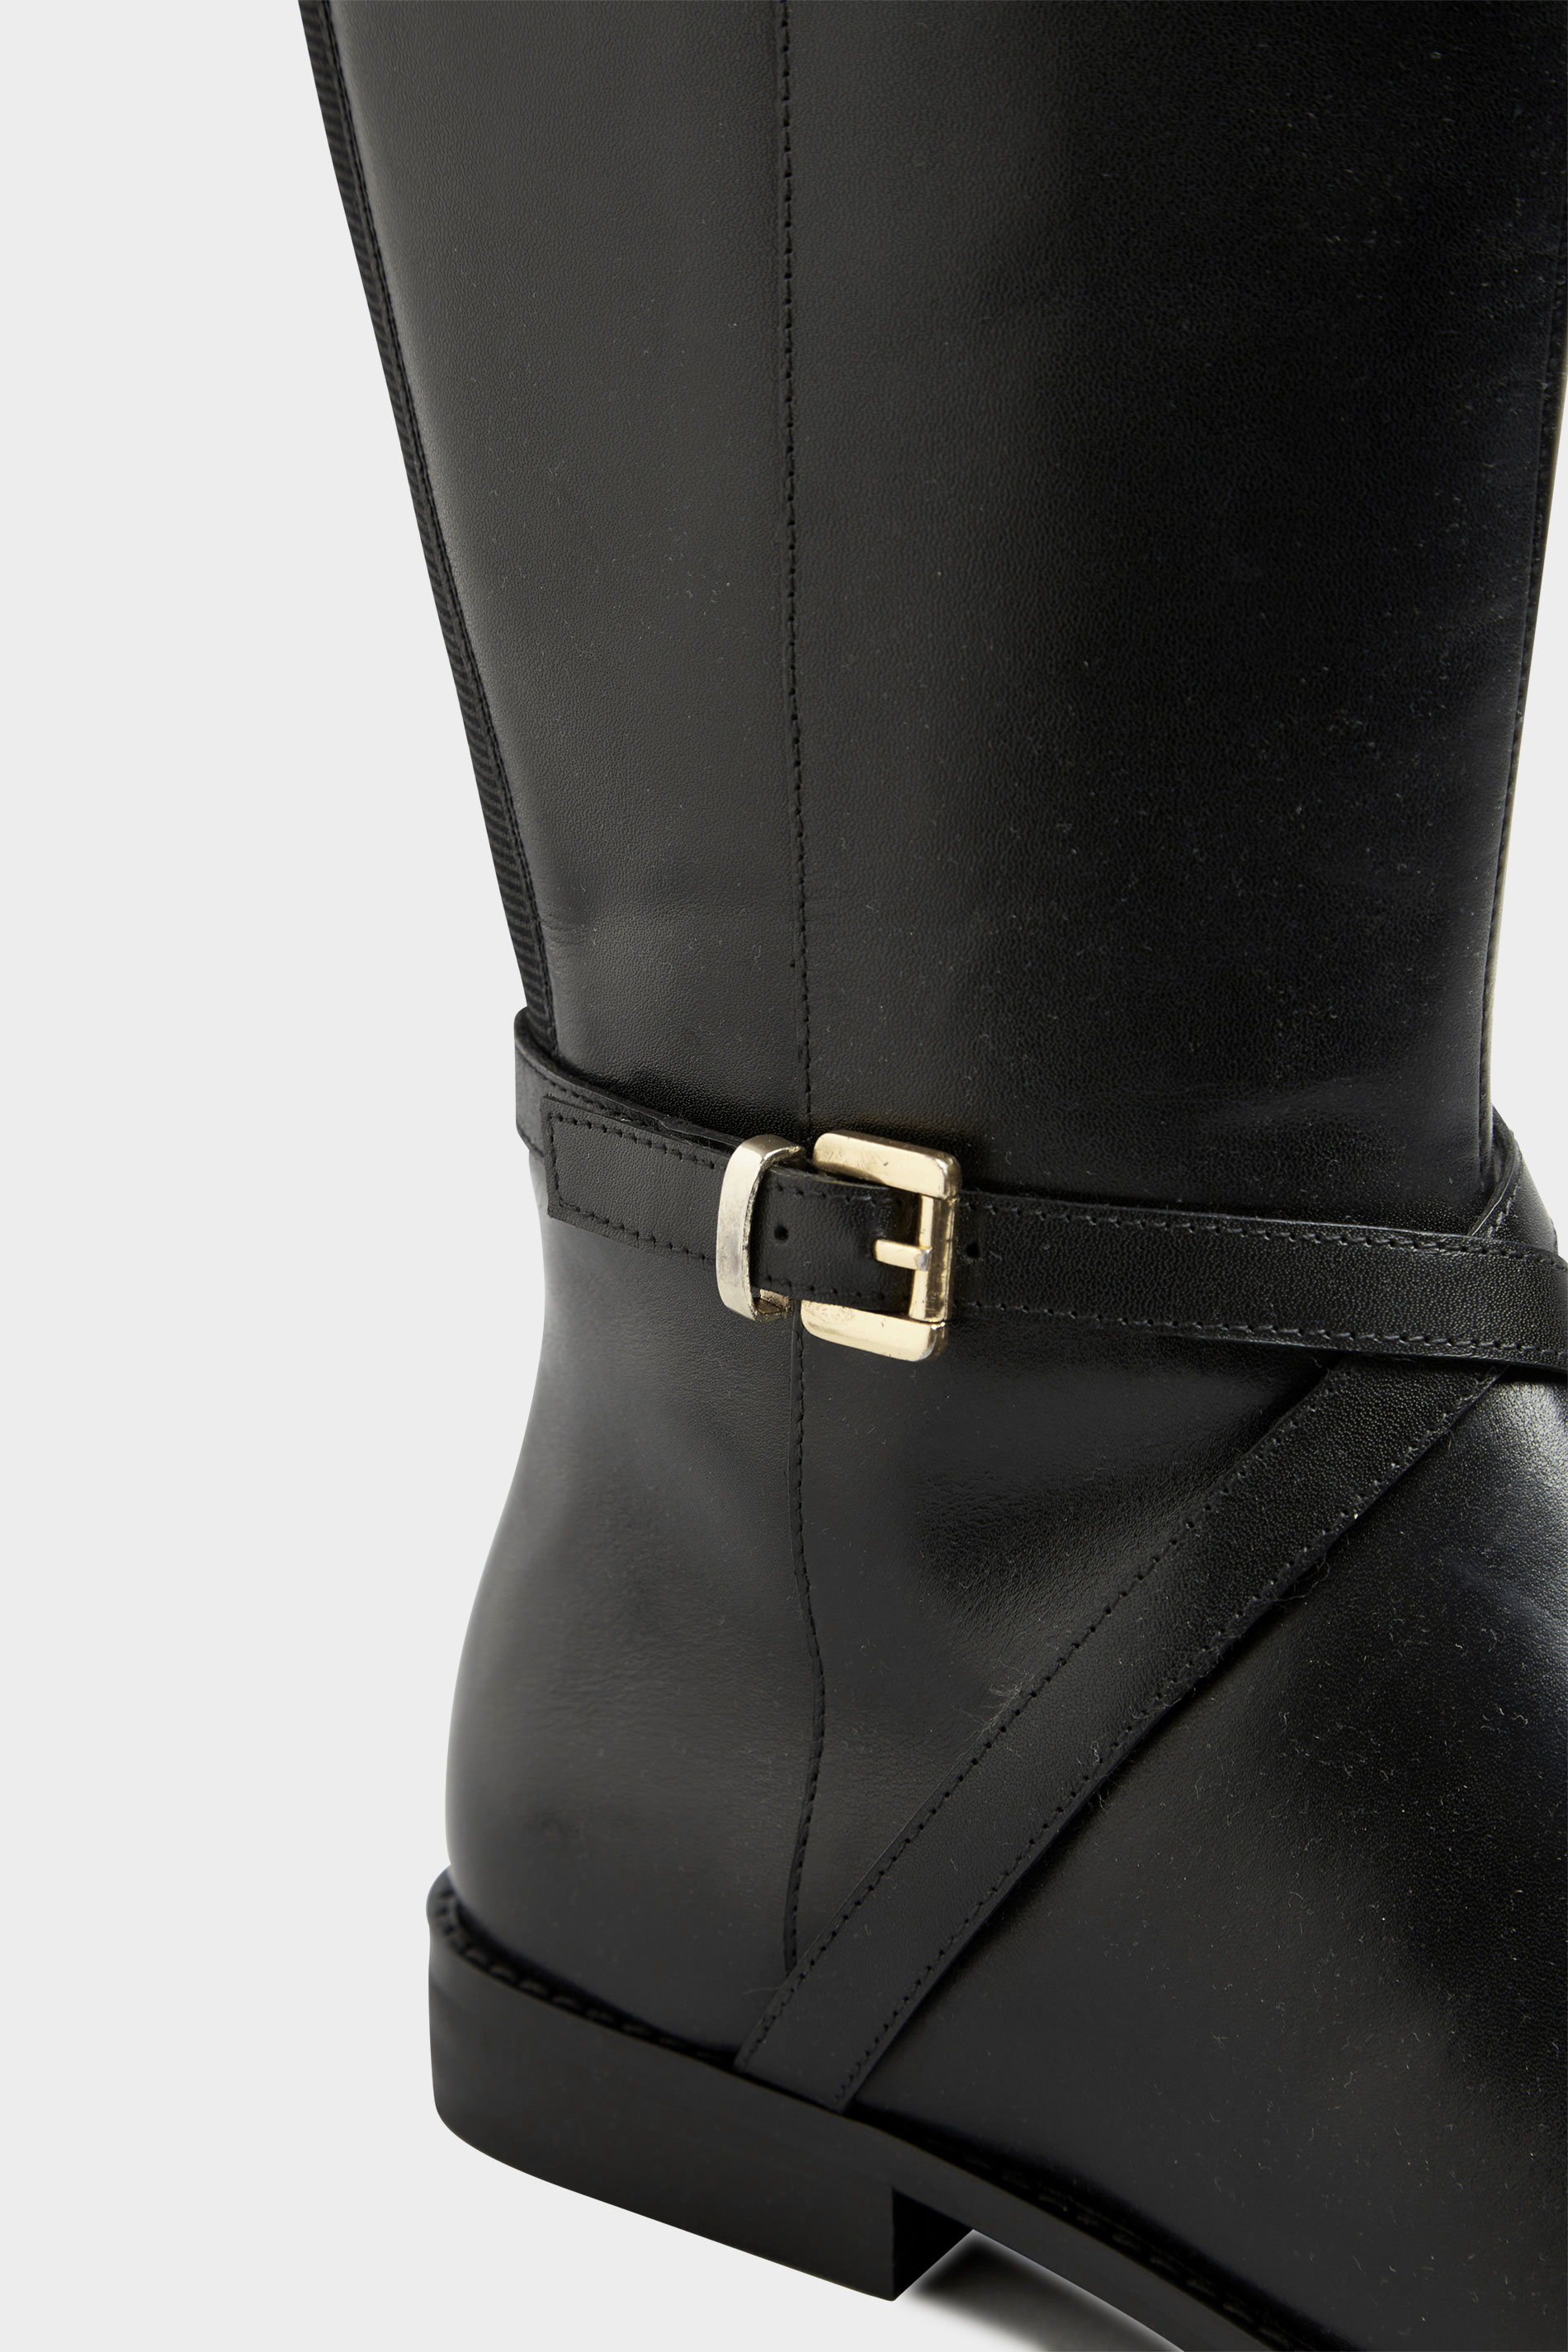 LTS Black Leather Riding Boots | Long Tall Sally